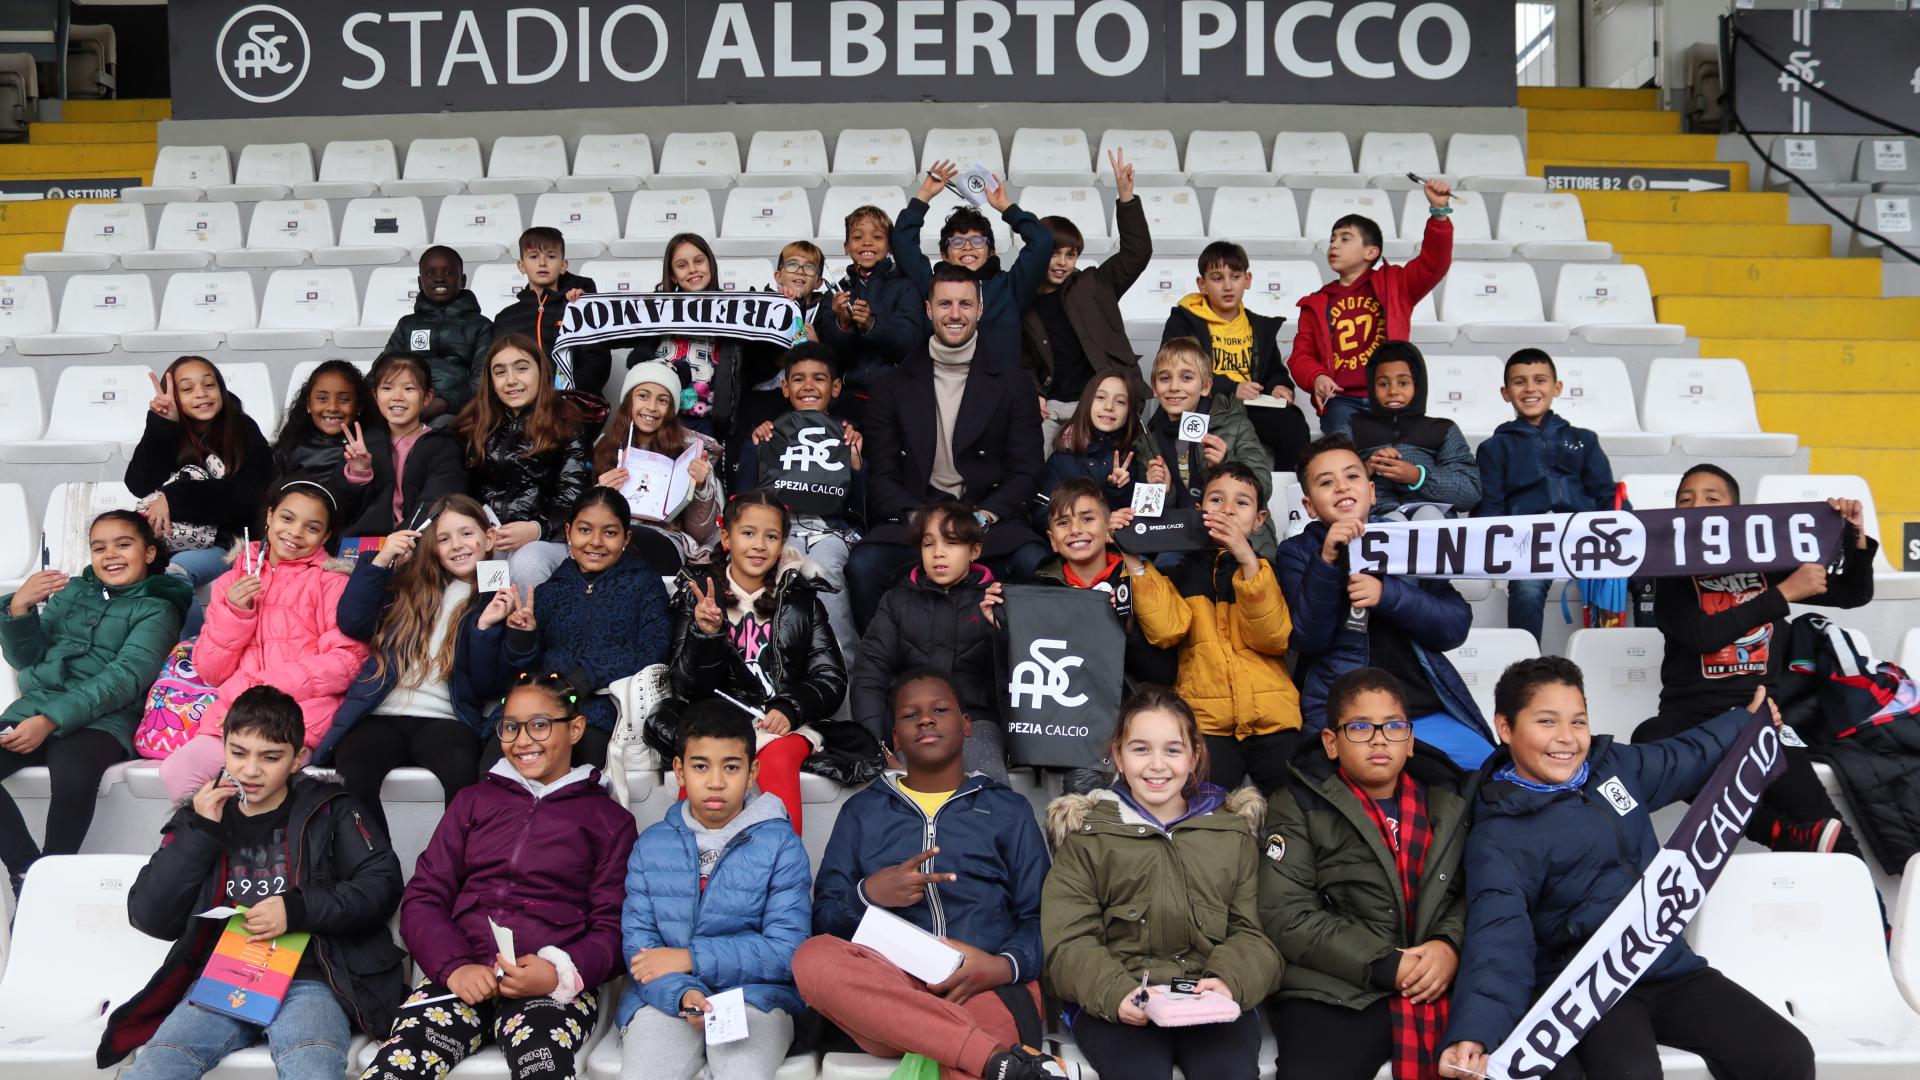 Schools at the Picco: Sala guest on the third meeting